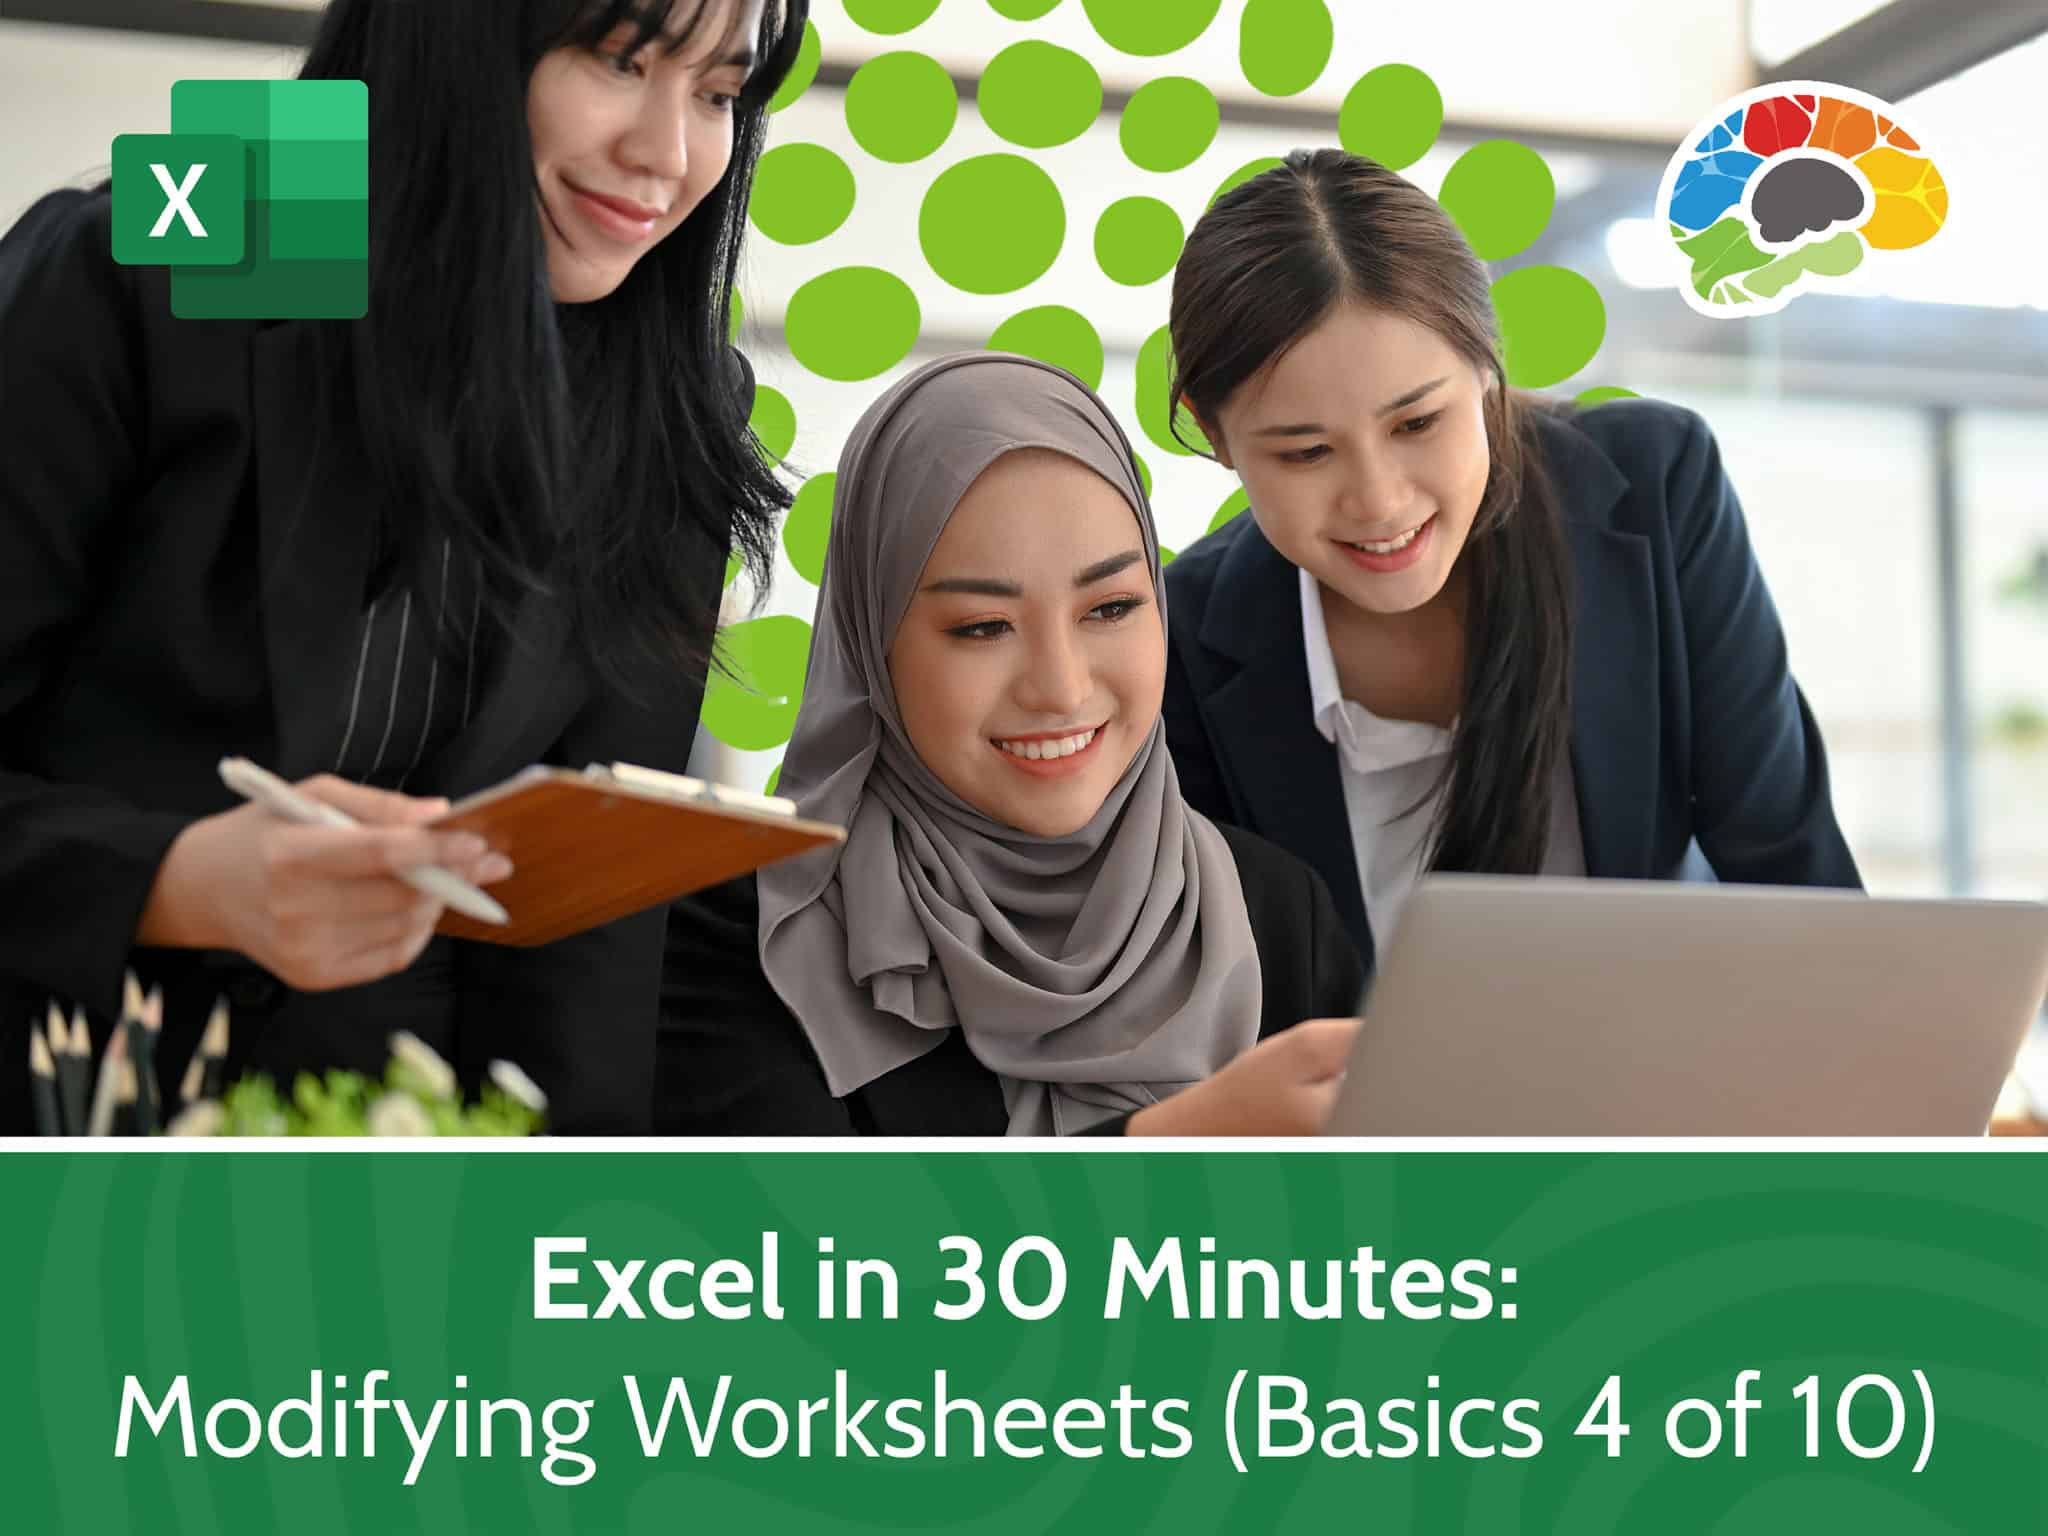 Excel in 30 Minutes Modifying Worksheets Basics 4 of 10 scaled